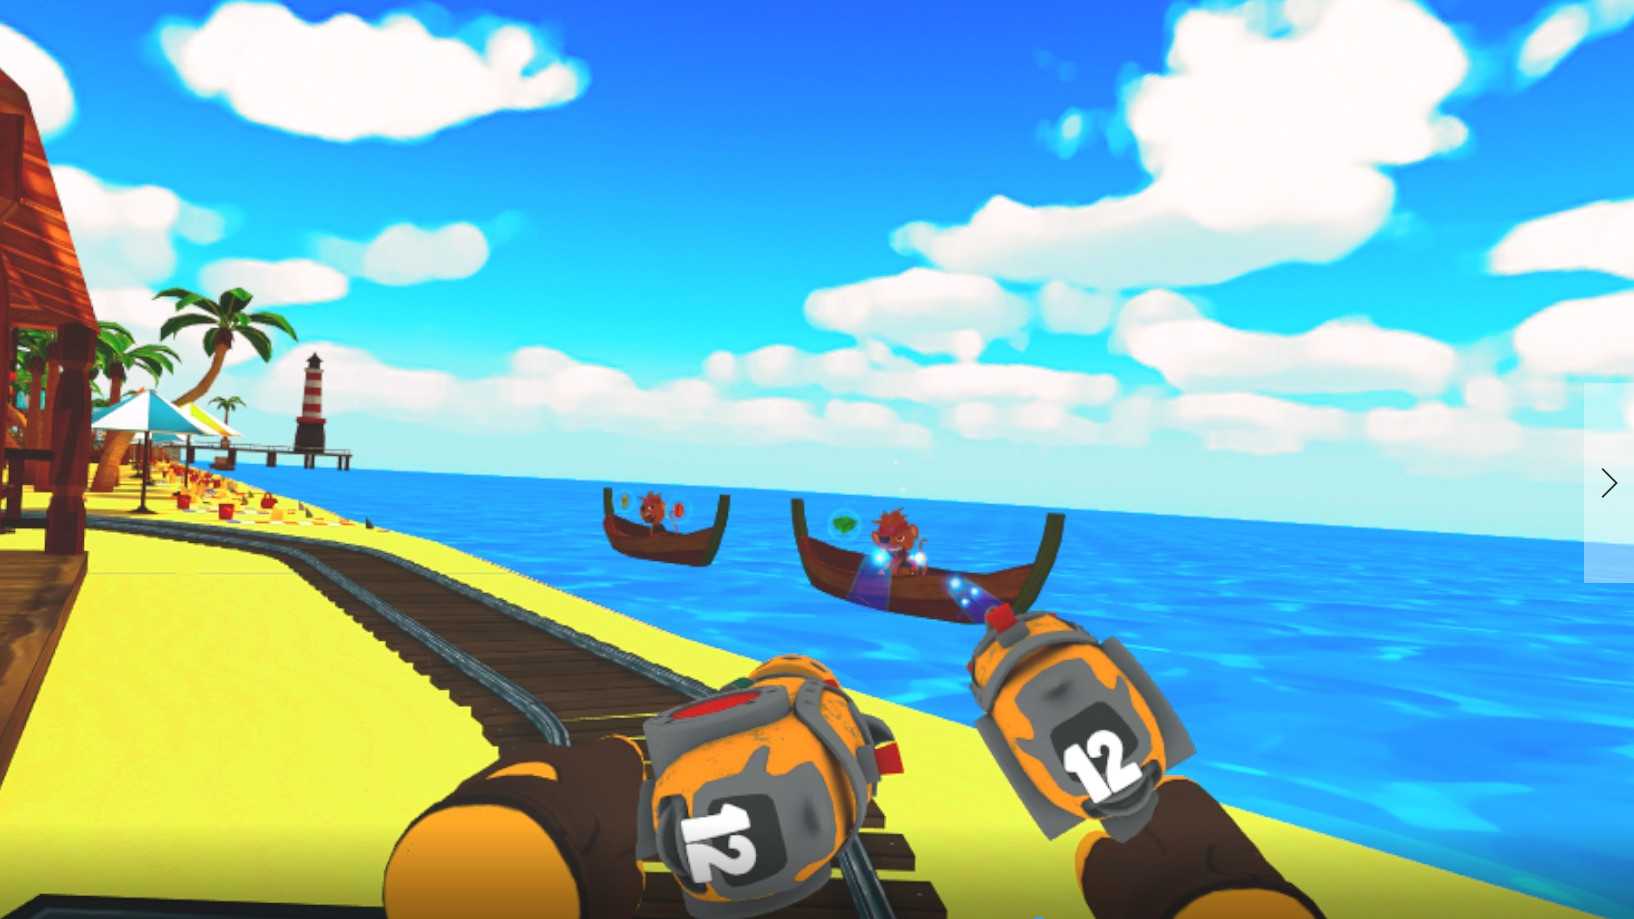 Gus Track Adventures VR